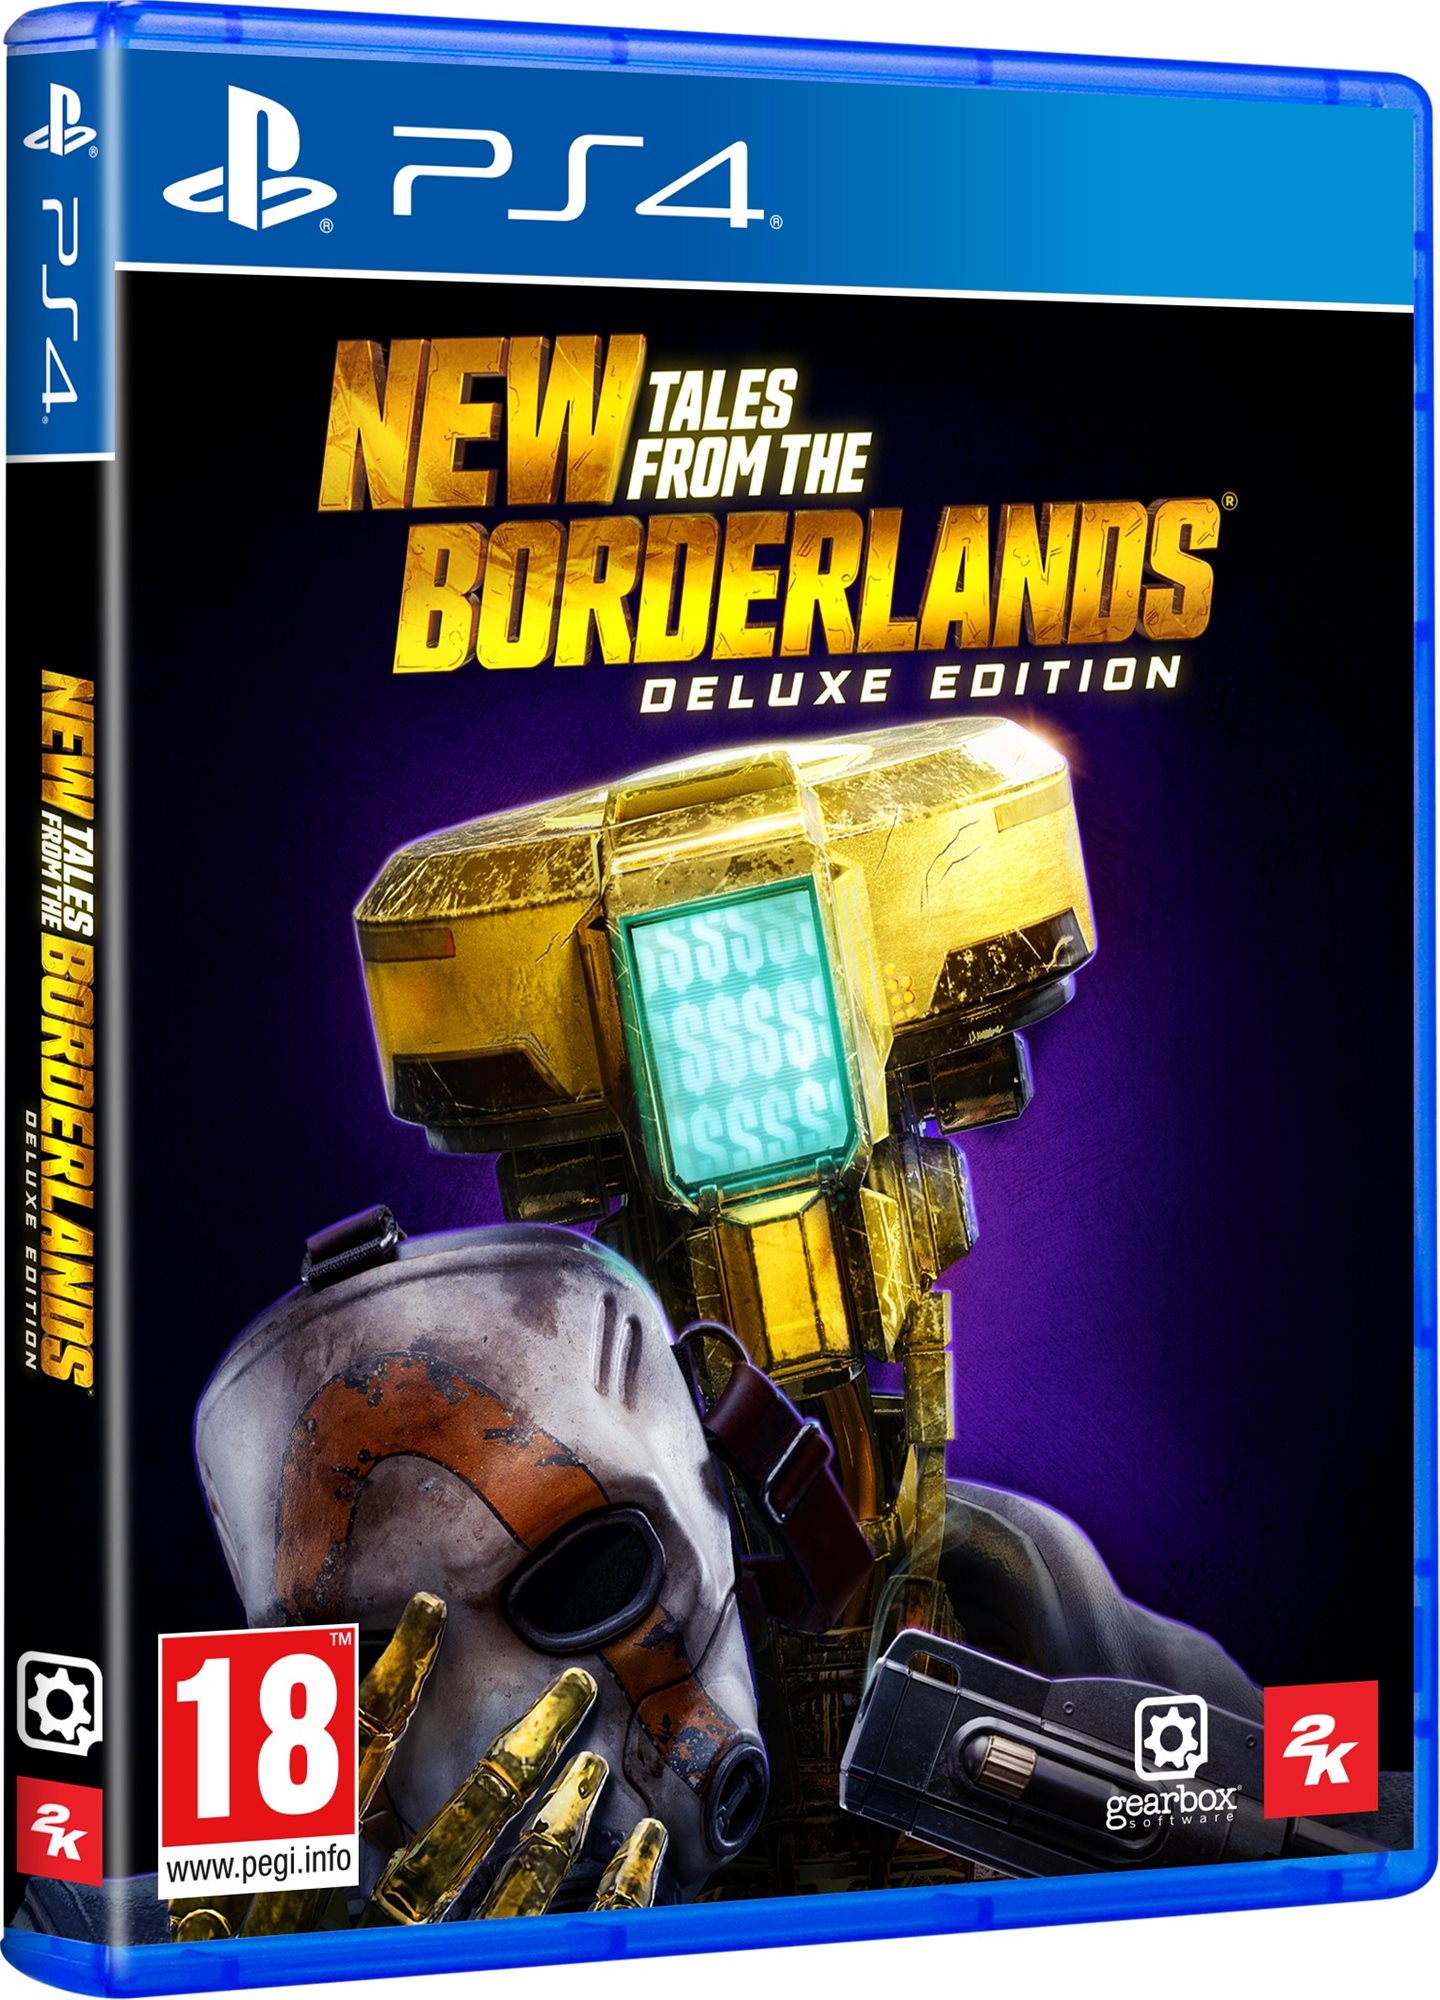 New Tales from the Borderlands Deluxe Edition - PS4